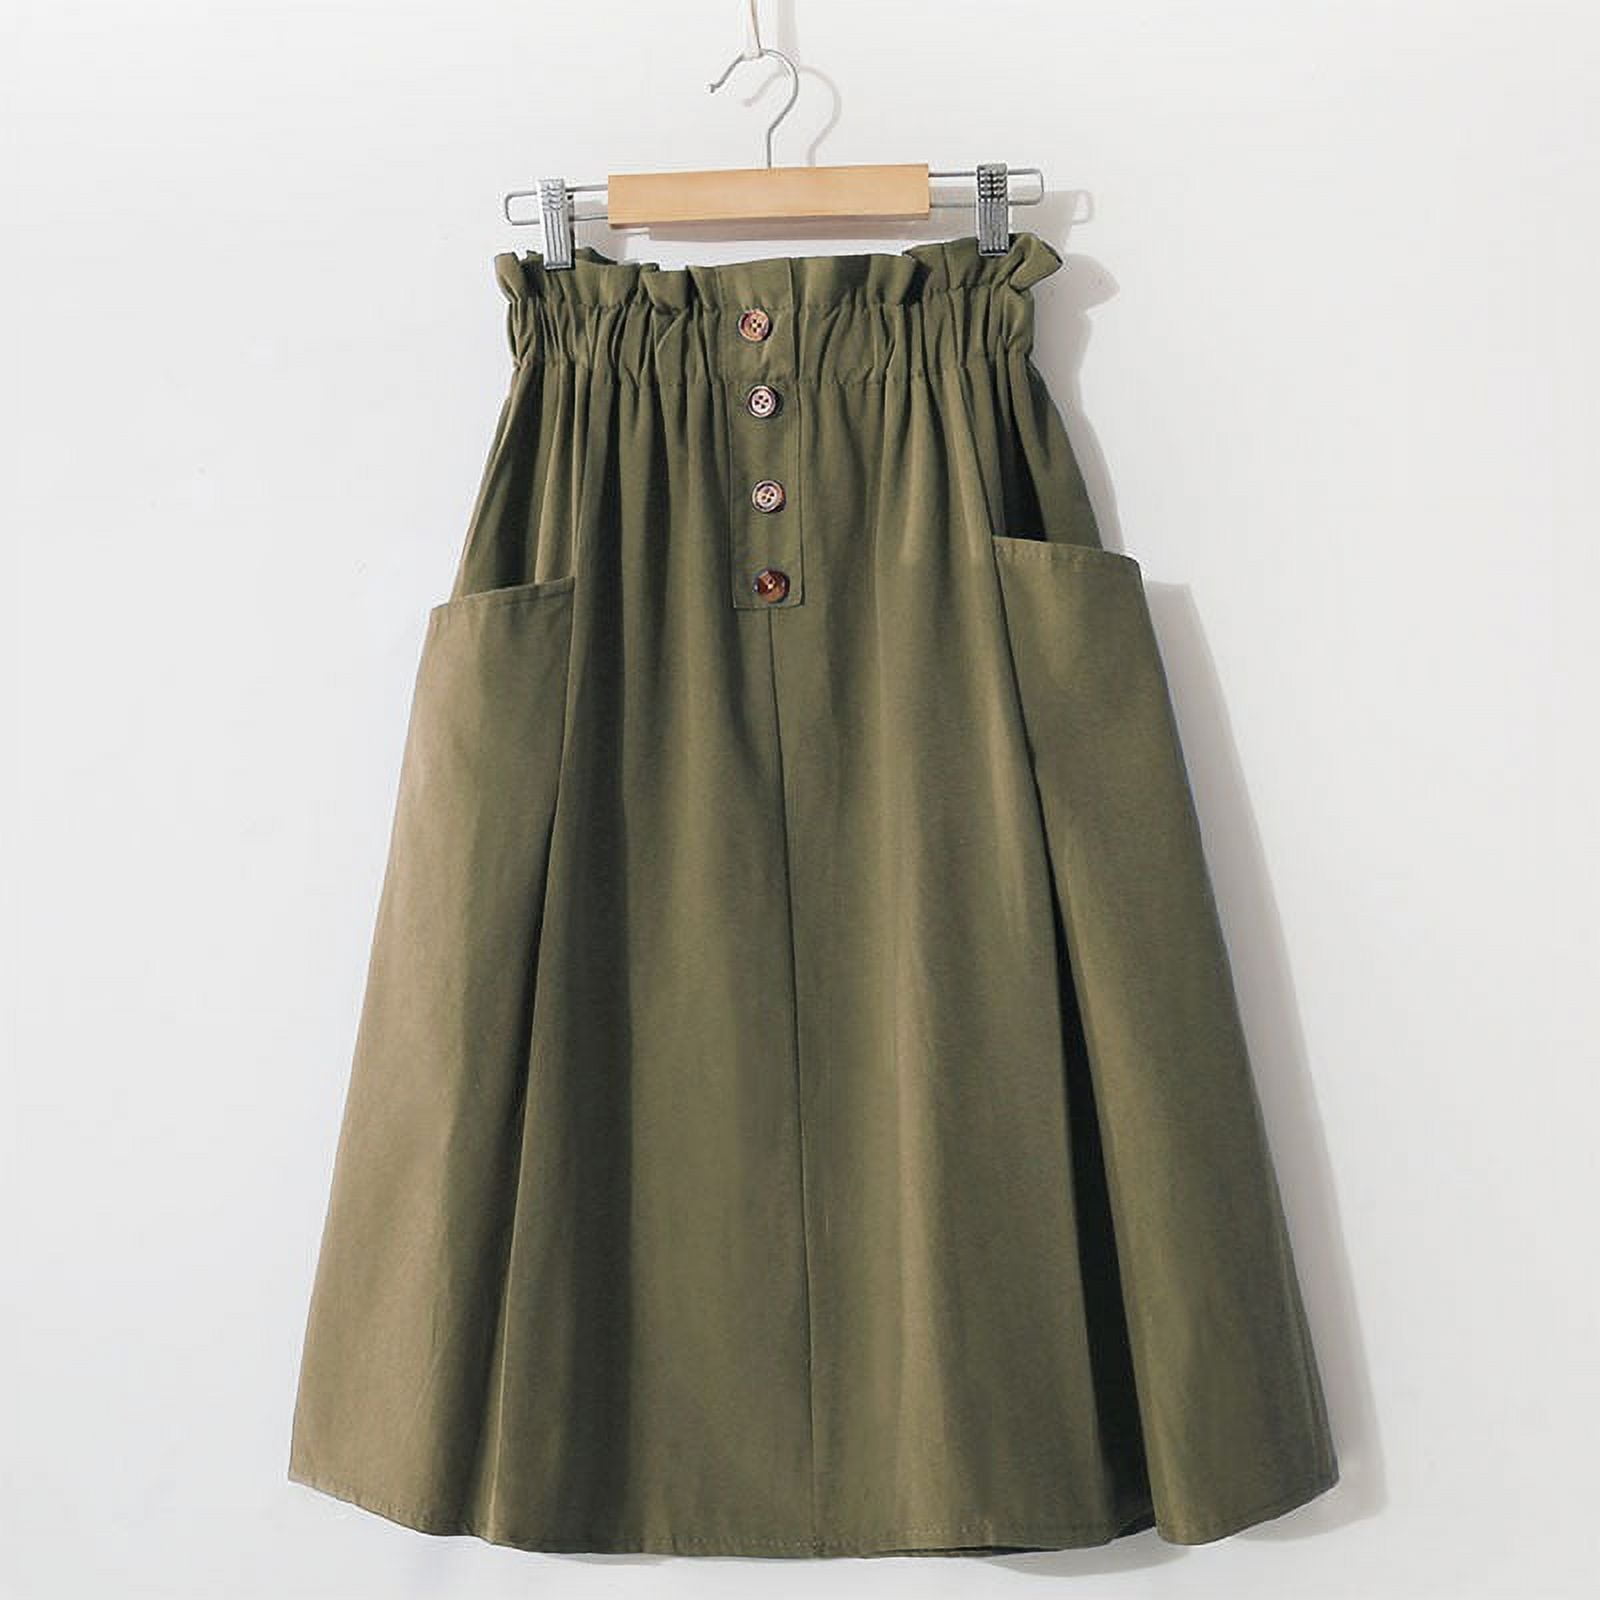 Women Vintage High Waist A-Line Midi Skirt Solid Button Skirts with ...